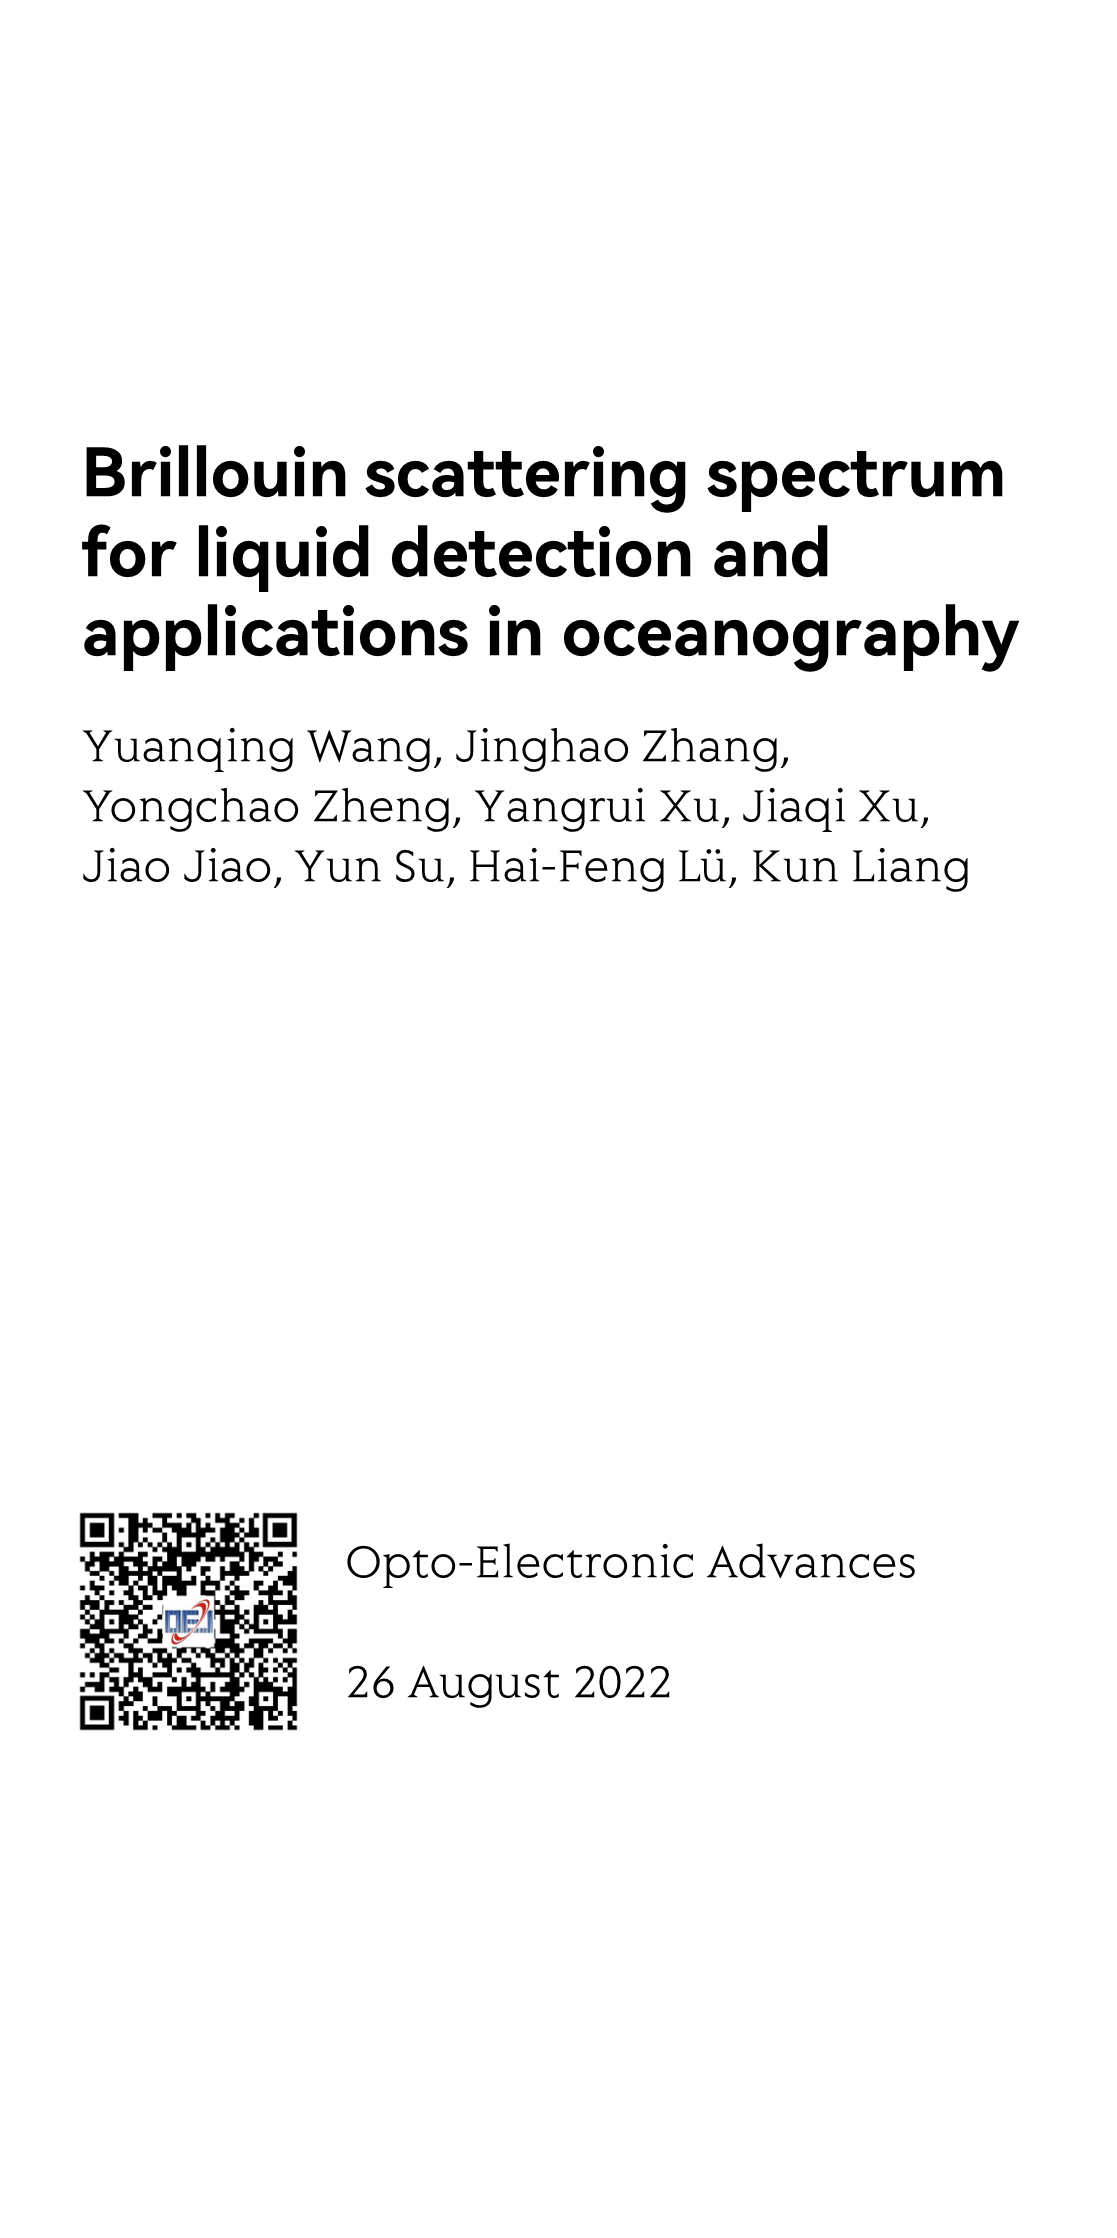 Brillouin scattering spectrum for liquid detection and applications in oceanography_1